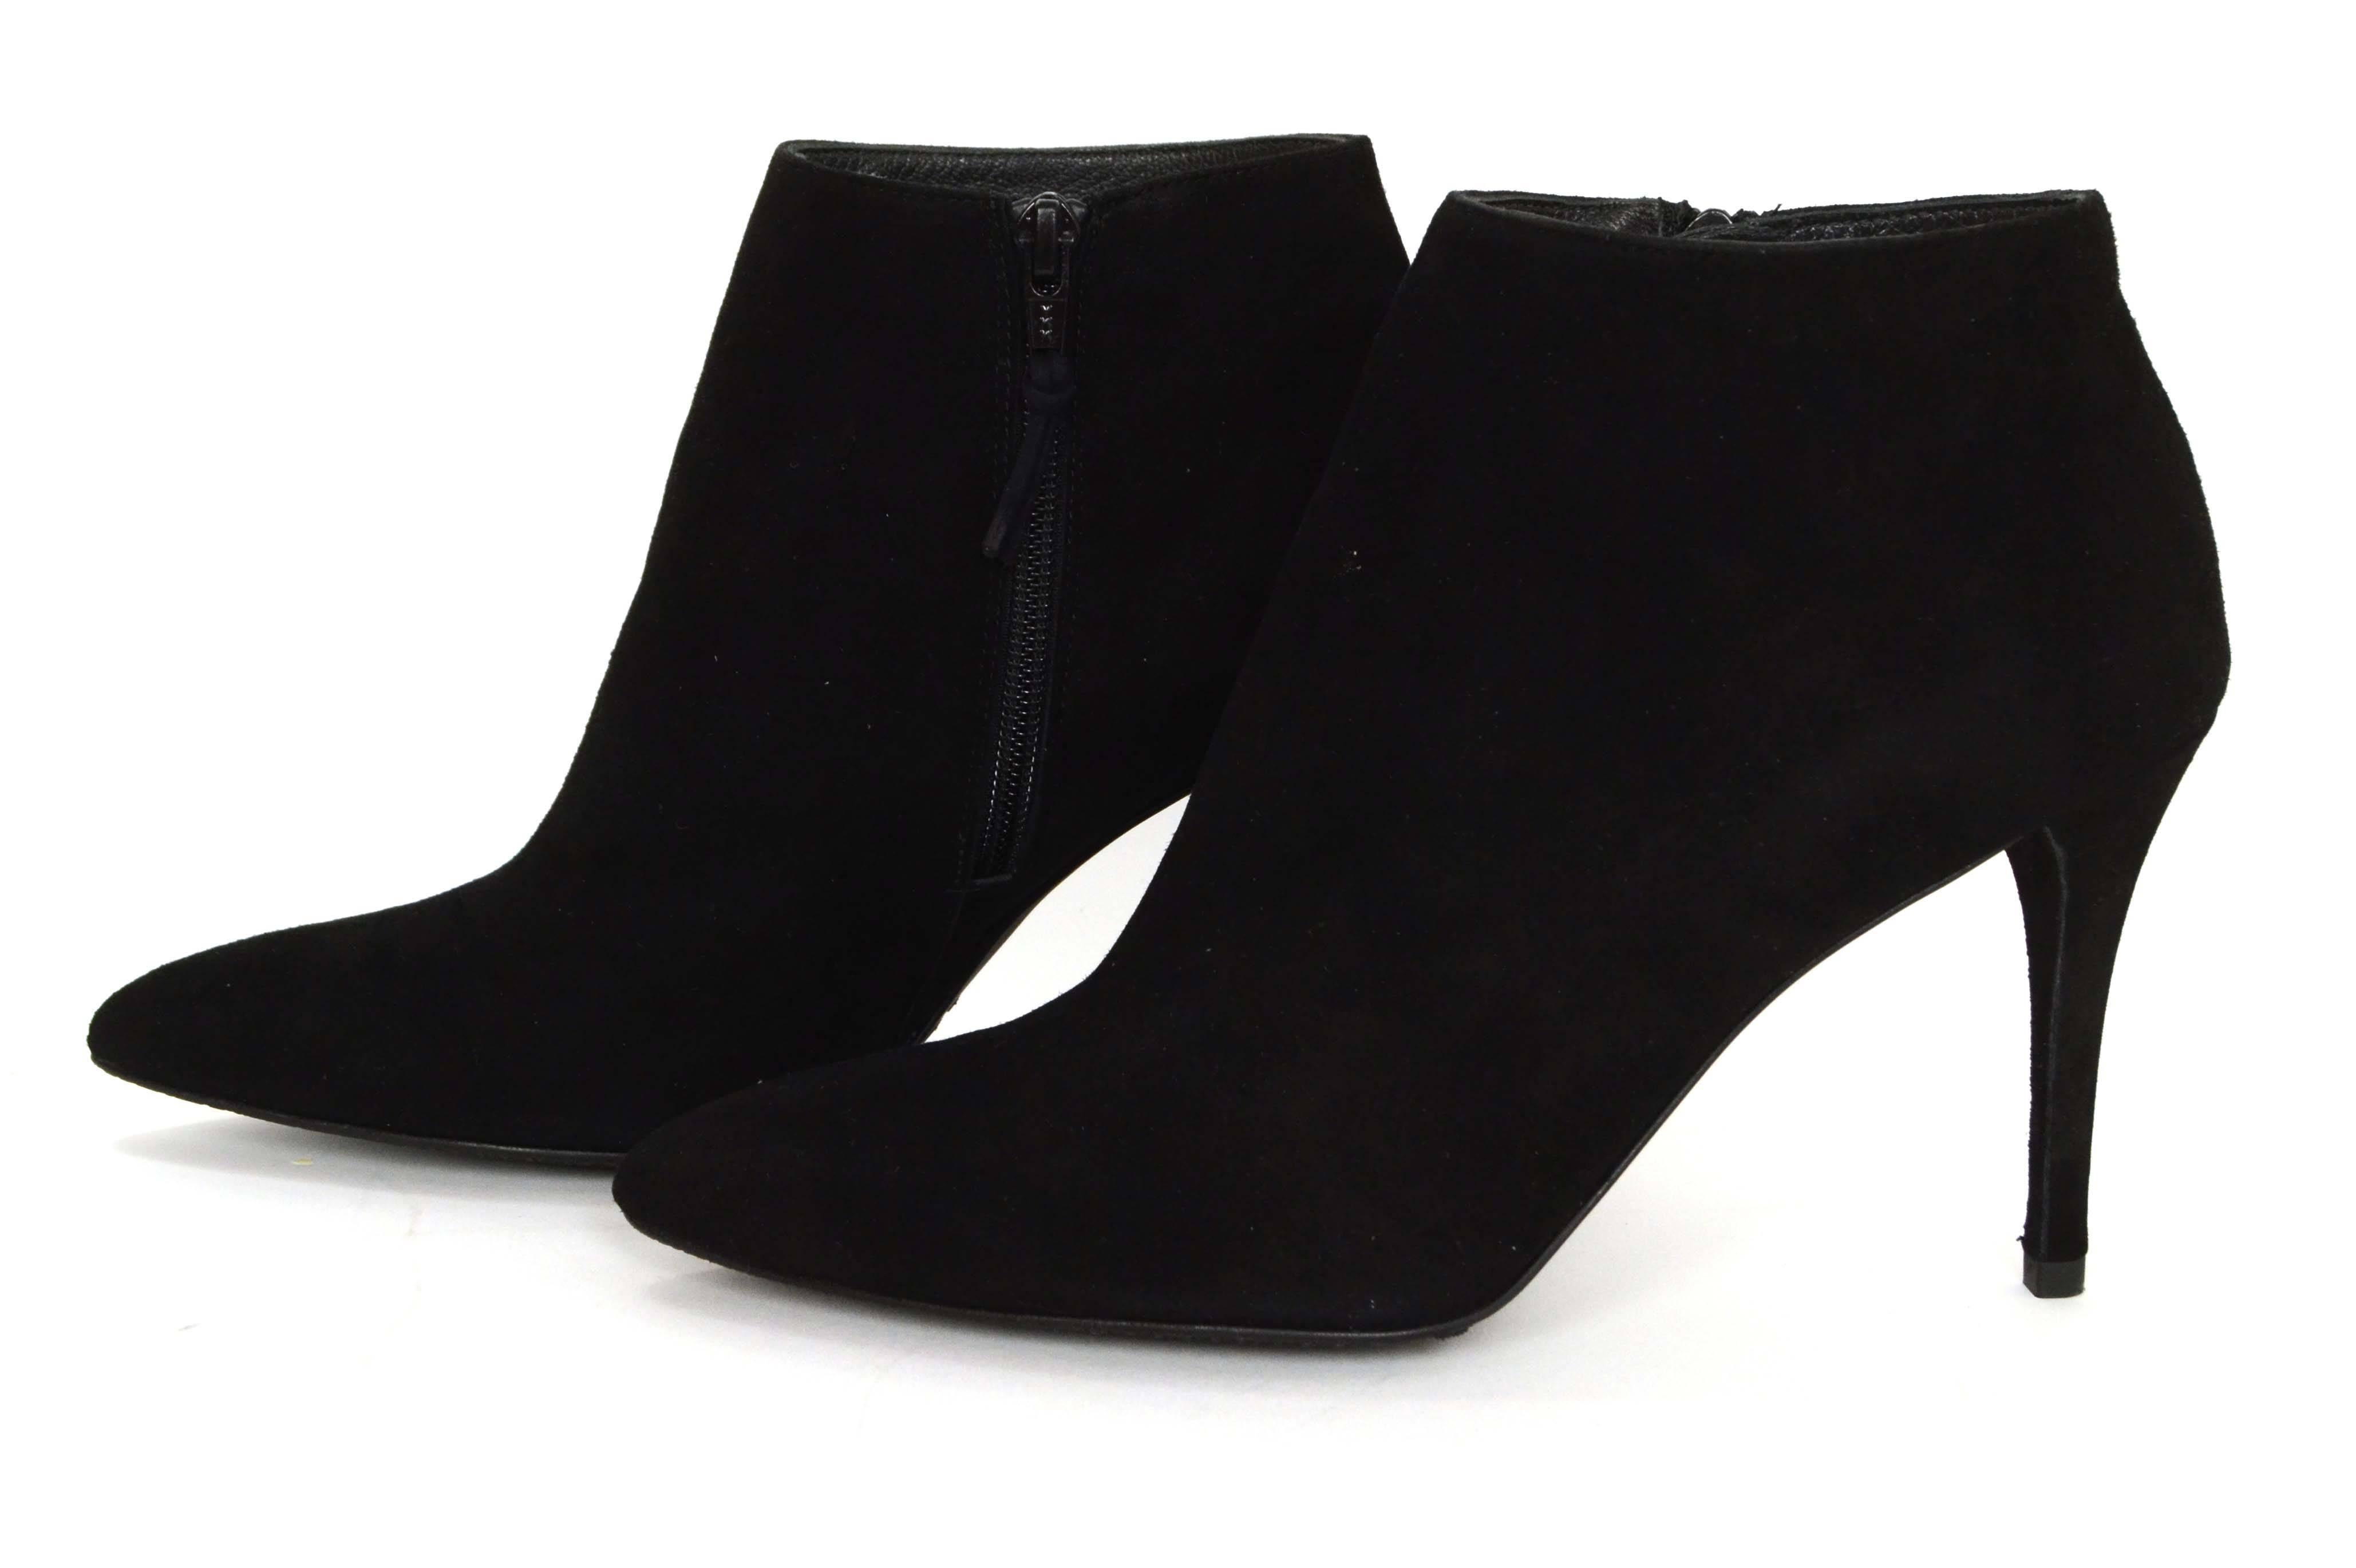 Stuart Weitzman Black Suede Carltone Booties
Made In: Spain
Color: Black
Materials: Suede
Closure/Opening: Inside ankle zip up
Sole Stamp: Stuart Weitzman Made in Spain
Overall Condition: Excellent pre-owned condition
Includes: Stuart